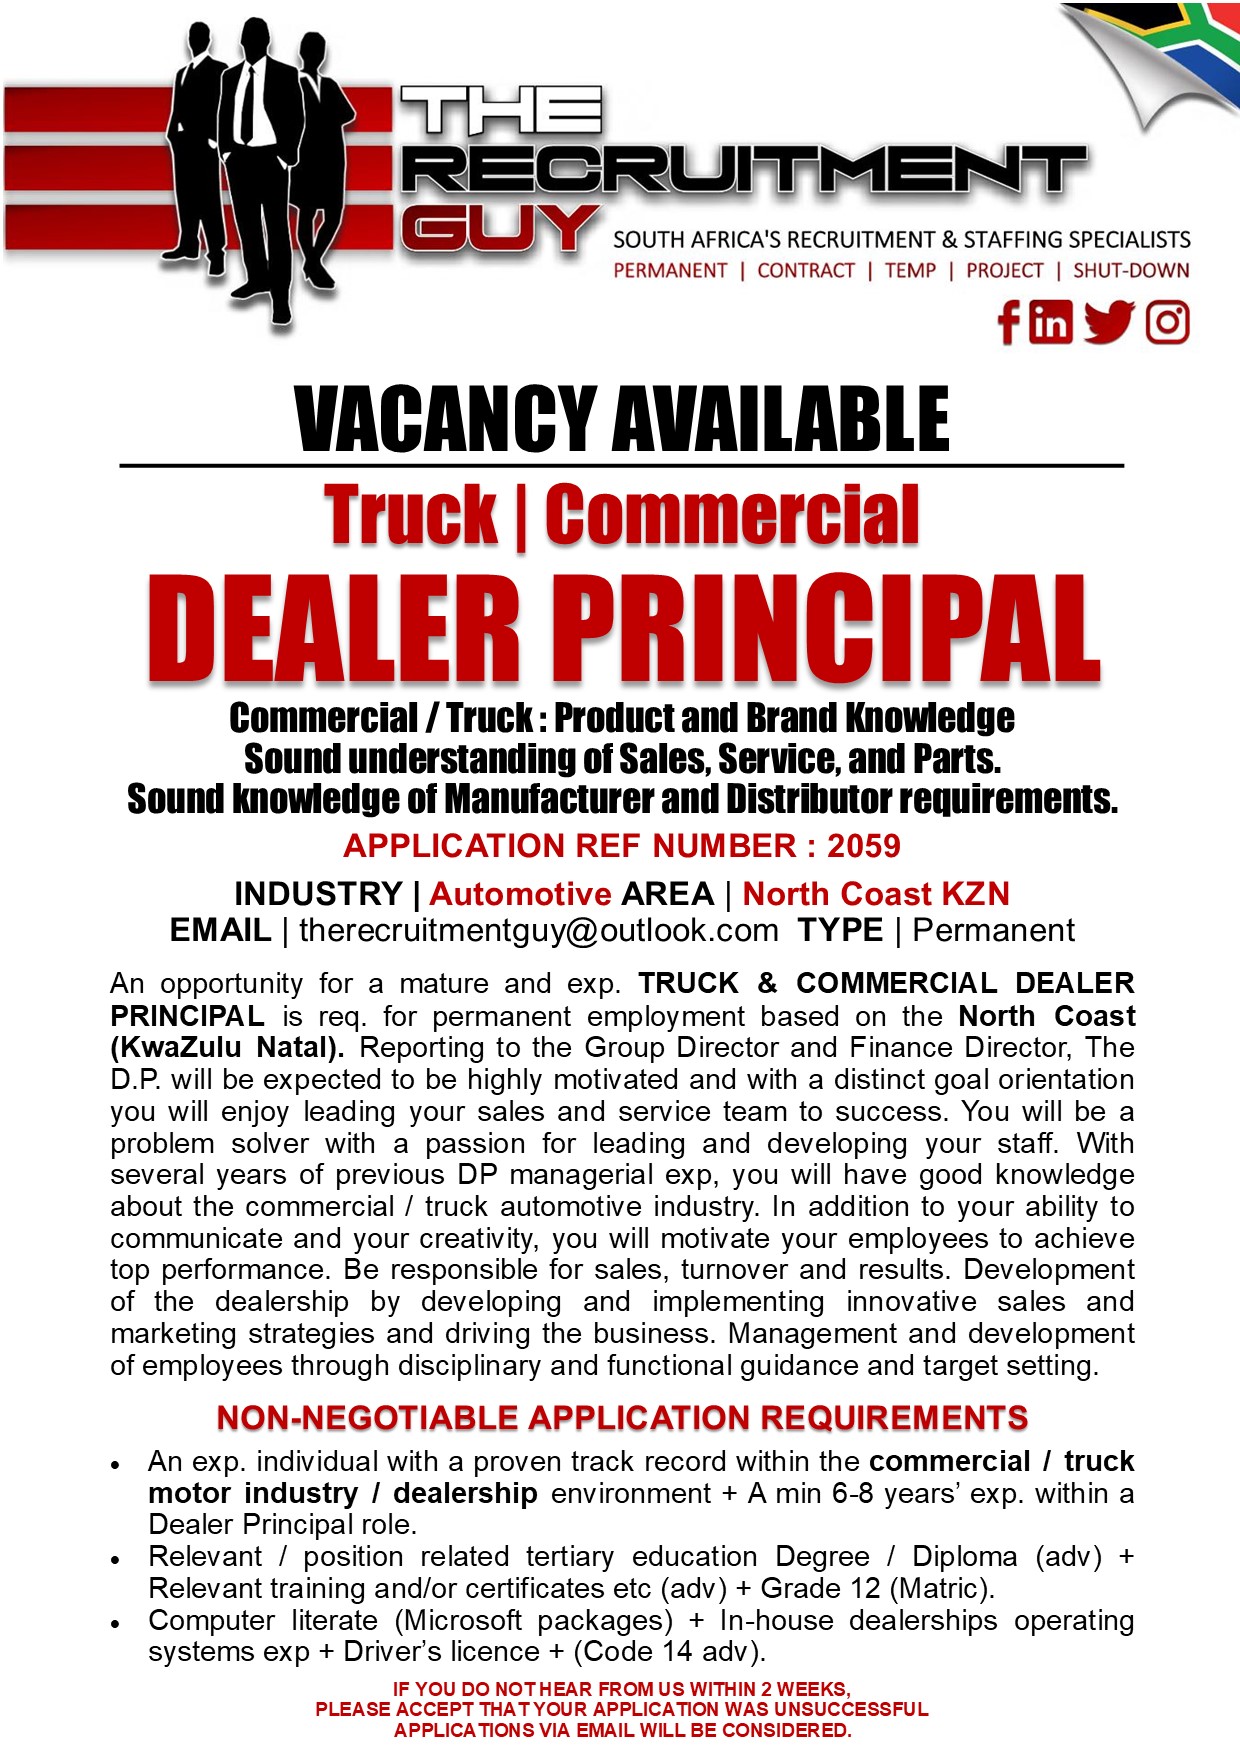 GUY SOUTH AFRICA'S RECRUITMENT & STAFFING SPECIALISTS

PERMANENT | CONTRACT | TEMP | PROJECT | SHUT-DOWN

{ink JG]

VACANCY AVAILABLE
Truck | Commercial

DEALER PRINCIPAL

Commercial / Truck : Product and Brand Knowledge
Sound understanding of Sales, Service, and Parts.
Sound knowledge of Manufacturer and Distributor requirements.
APPLICATION REF NUMBER : 2059

INDUSTRY | Automotive AREA | North Coast KZN
EMAIL | therecruitmentguy@outlook.com TYPE | Permanent

An opportunity for a mature and exp. TRUCK & COMMERCIAL DEALER
PRINCIPAL is req. for permanent employment based on the North Coast
(KwaZulu Natal). Reporting to the Group Director and Finance Director, The
D.P. will be expected to be highly motivated and with a distinct goal orientation
you will enjoy leading your sales and service team to success. You will be a
problem solver with a passion for leading and developing your staff. With
several years of previous DP managerial exp, you will have good knowledge
about the commercial / truck automotive industry. In addition to your ability to
communicate and your creativity, you will motivate your employees to achieve
top performance. Be responsible for sales, turnover and results. Development
of the dealership by developing and implementing innovative sales and
marketing strategies and driving the business. Management and development
of employees through disciplinary and functional guidance and target setting

NON-NEGOTIABLE APPLICATION REQUIREMENTS

« An exp. individual with a proven track record within the commercial / truck
motor industry / dealership environment + A min 6-8 years’ exp. within a
Dealer Principal role

+ Relevant / position related tertiary education Degree / Diploma (adv) +
Relevant training and/or certificates etc (adv) + Grade 12 (Matric)

« Computer literate (Microsoft packages) + In-house dealerships operating
systems exp + Driver's licence + (Code 14 adv)

IF YOU DO NOTHEAR FROM US WITHIN 2 WEEKS,
PLEASE ACCEPT THAT YOUR APPLICATION WAS UNSUCCESSFUL
APPLICATIONS VIA EMAIL WILL BE CONSIDERED.